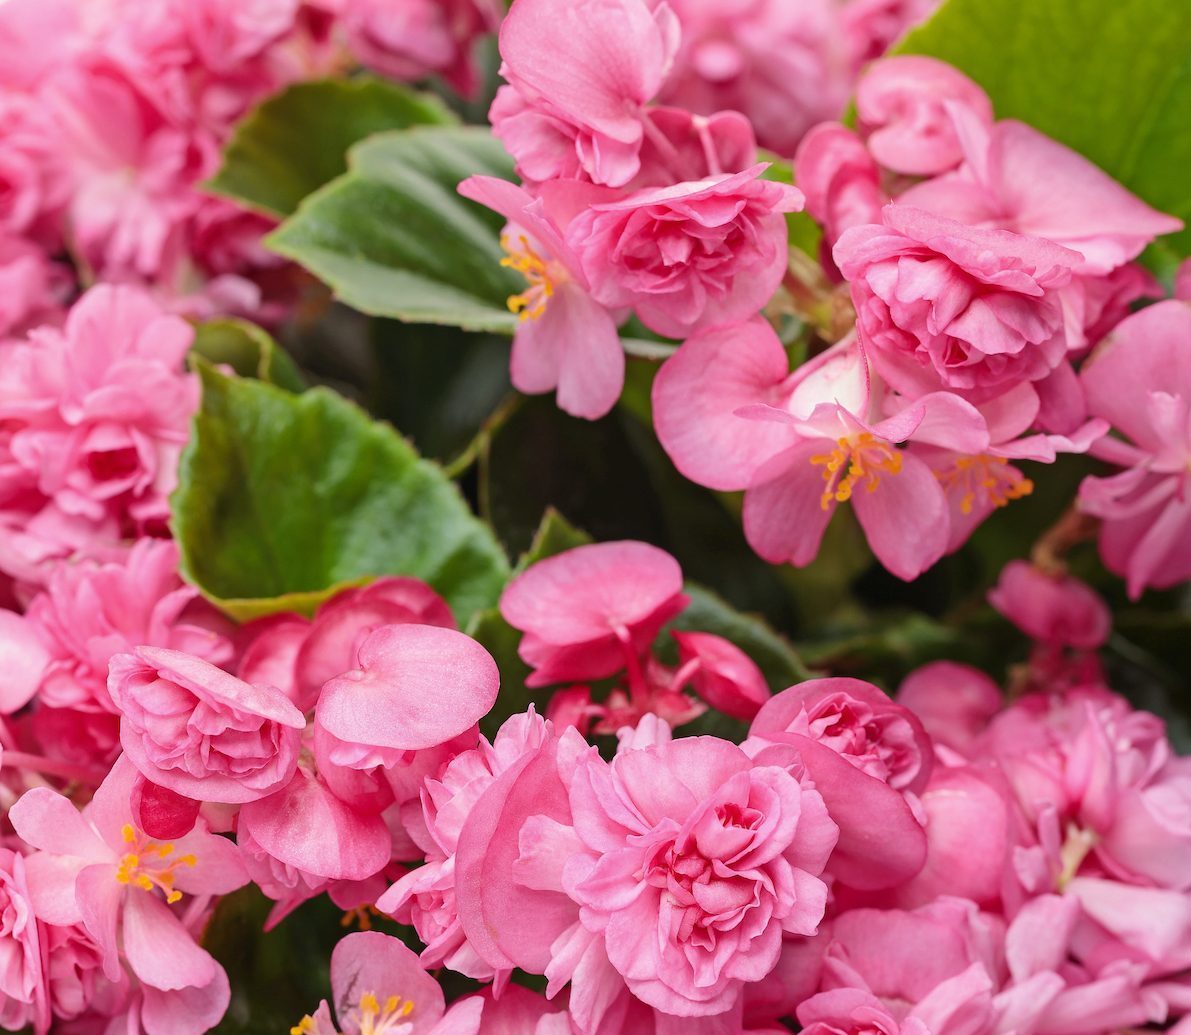 Begonia Care: What You Need to Know